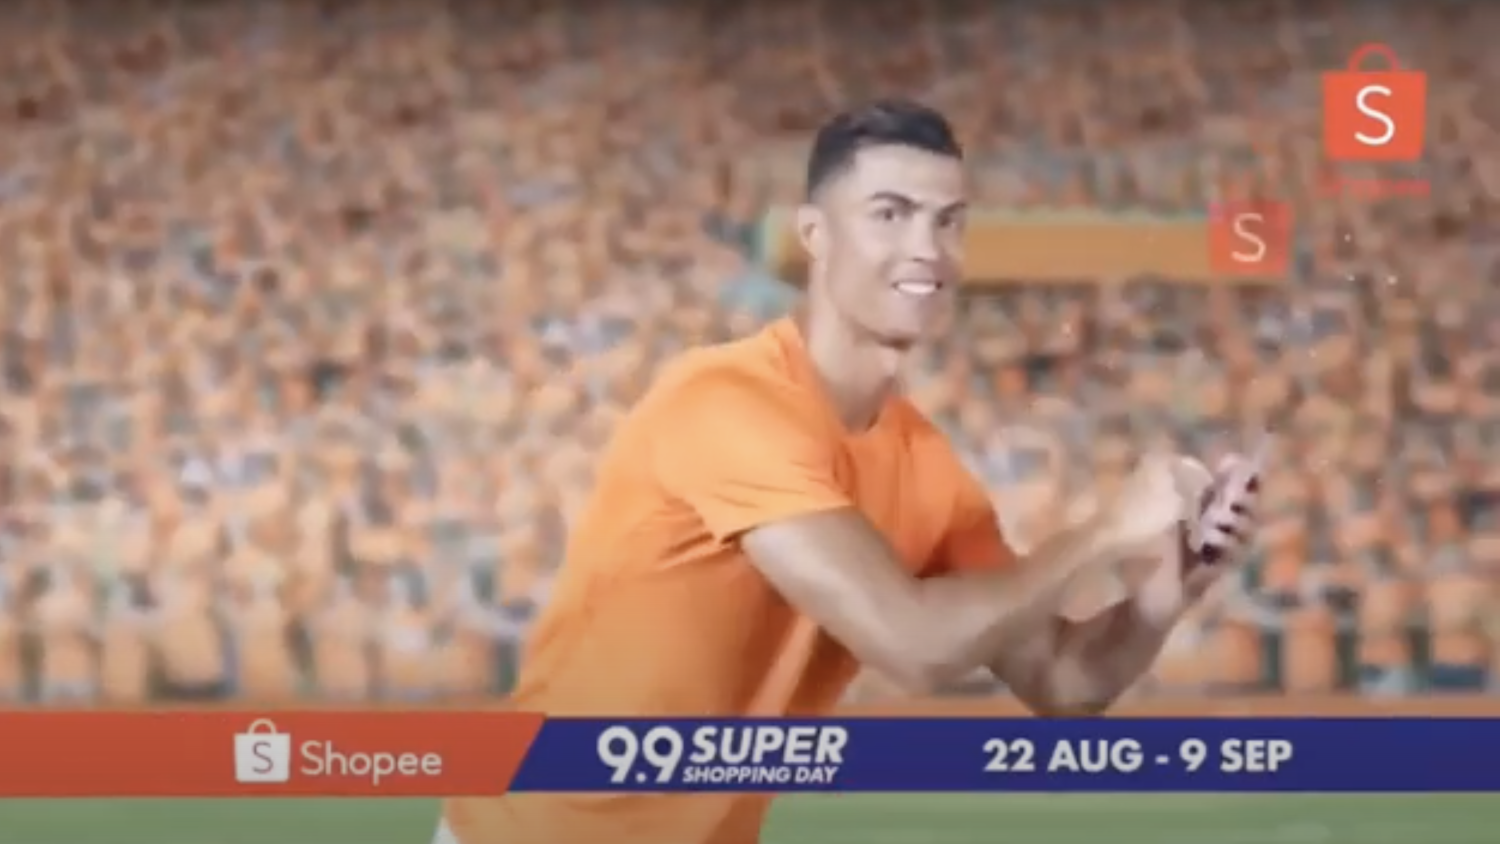 Cristiano Ronaldo Shopee Commercial Is Still So Funny To Watch